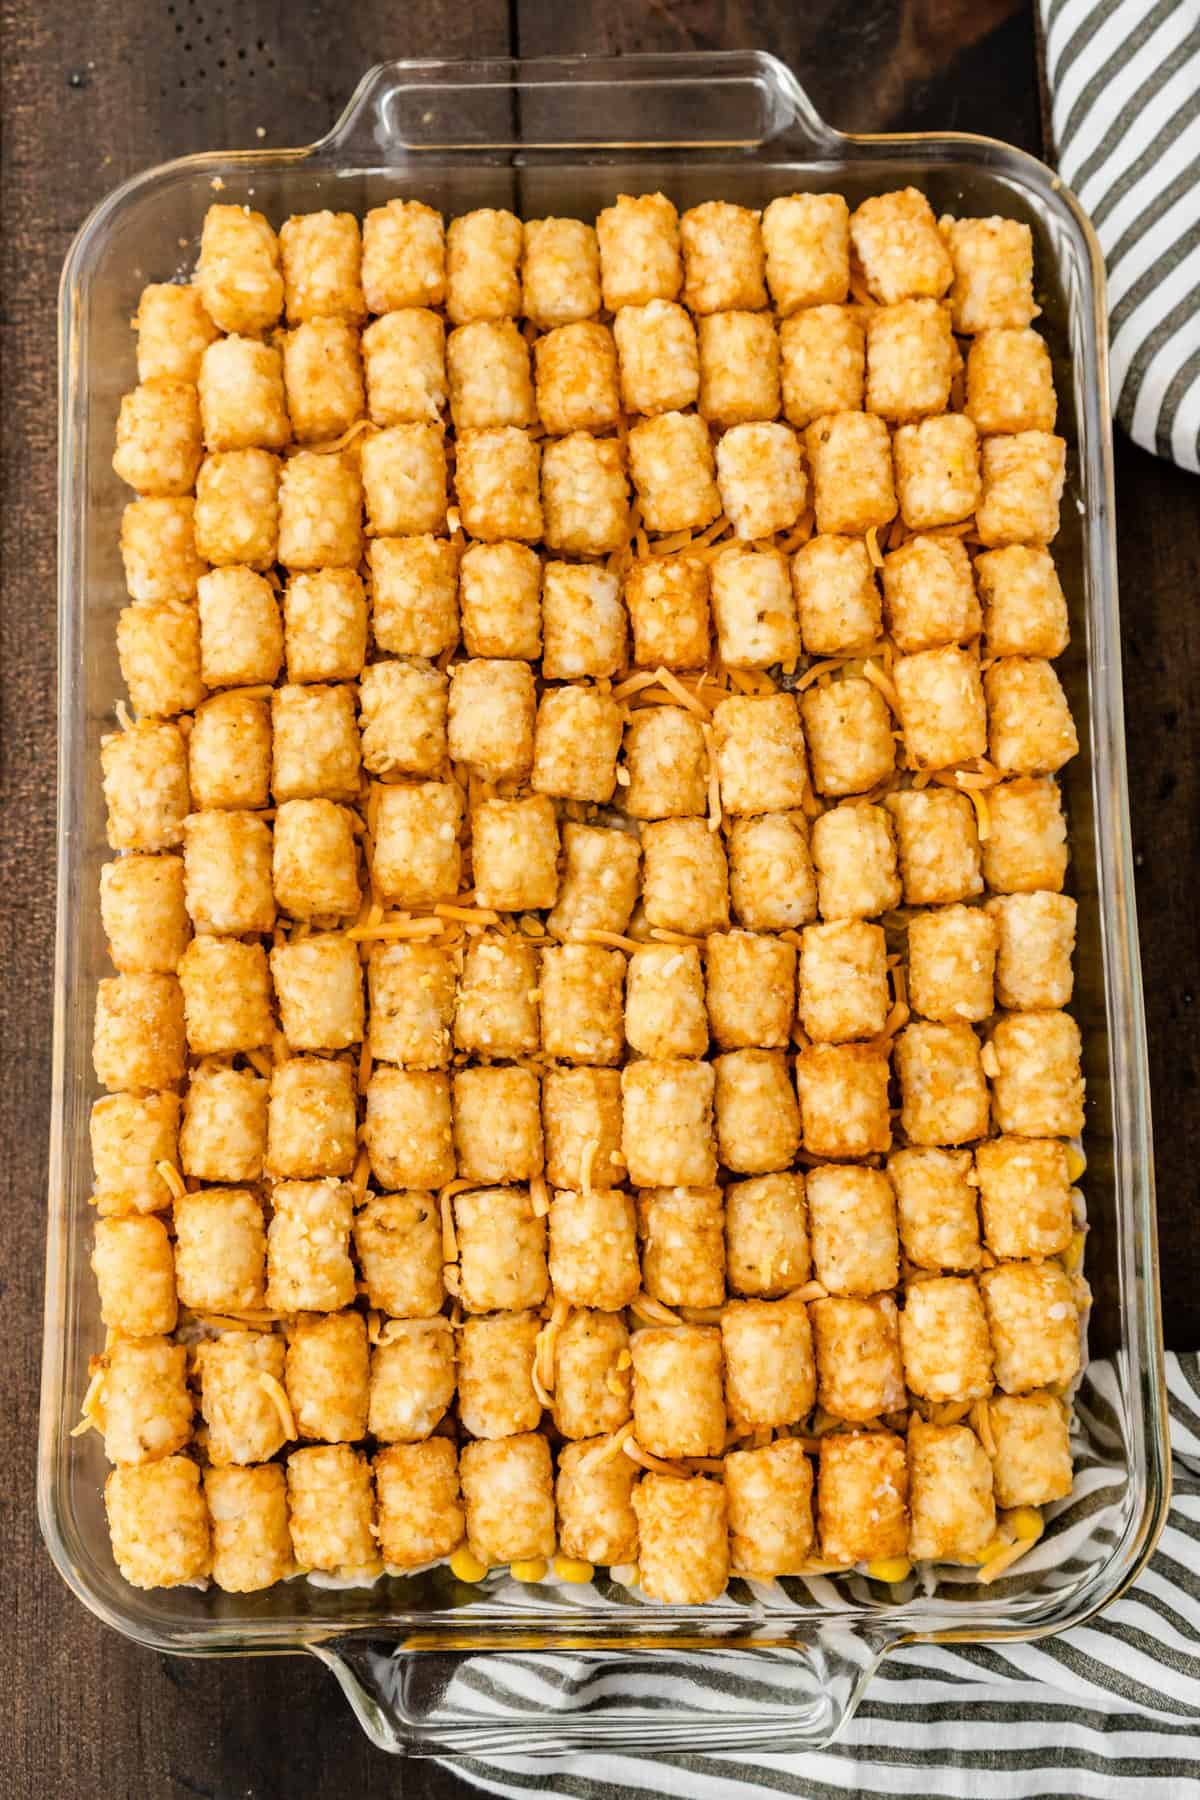 After ground beef mixutre is spread in 9x13 baking dish, tator tots are lined overtop of the Tator Tot Casserole